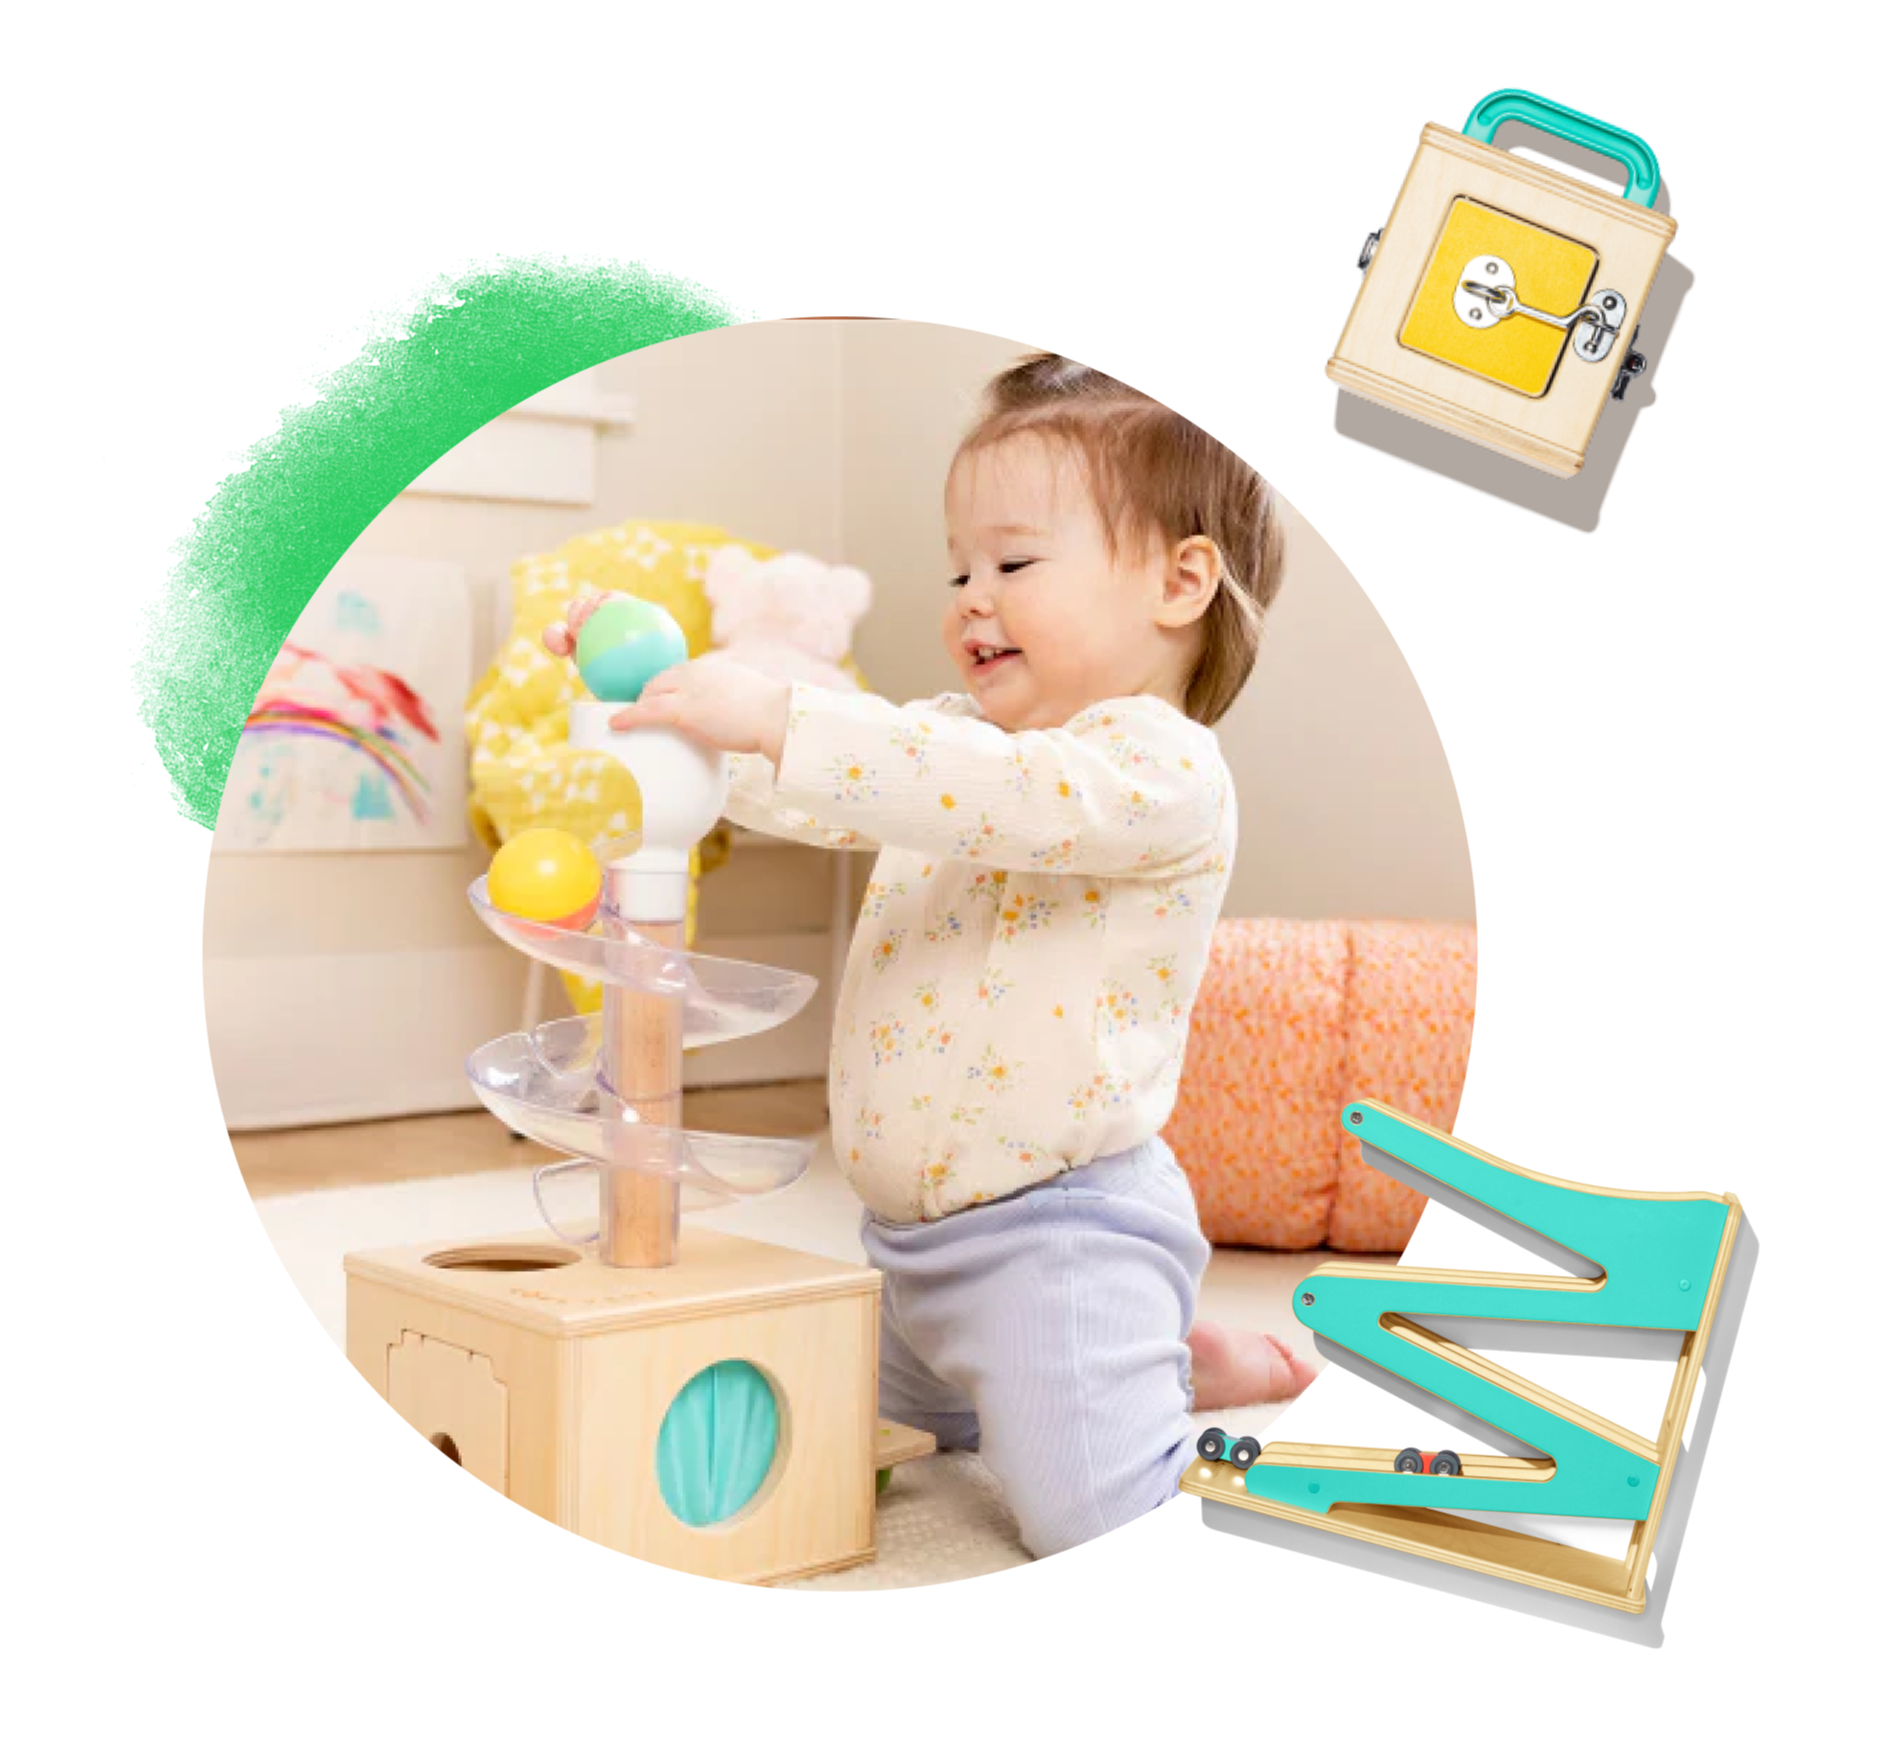 Baby Montessori Math Toys Kids Educational Wooden Toys 5 in 1